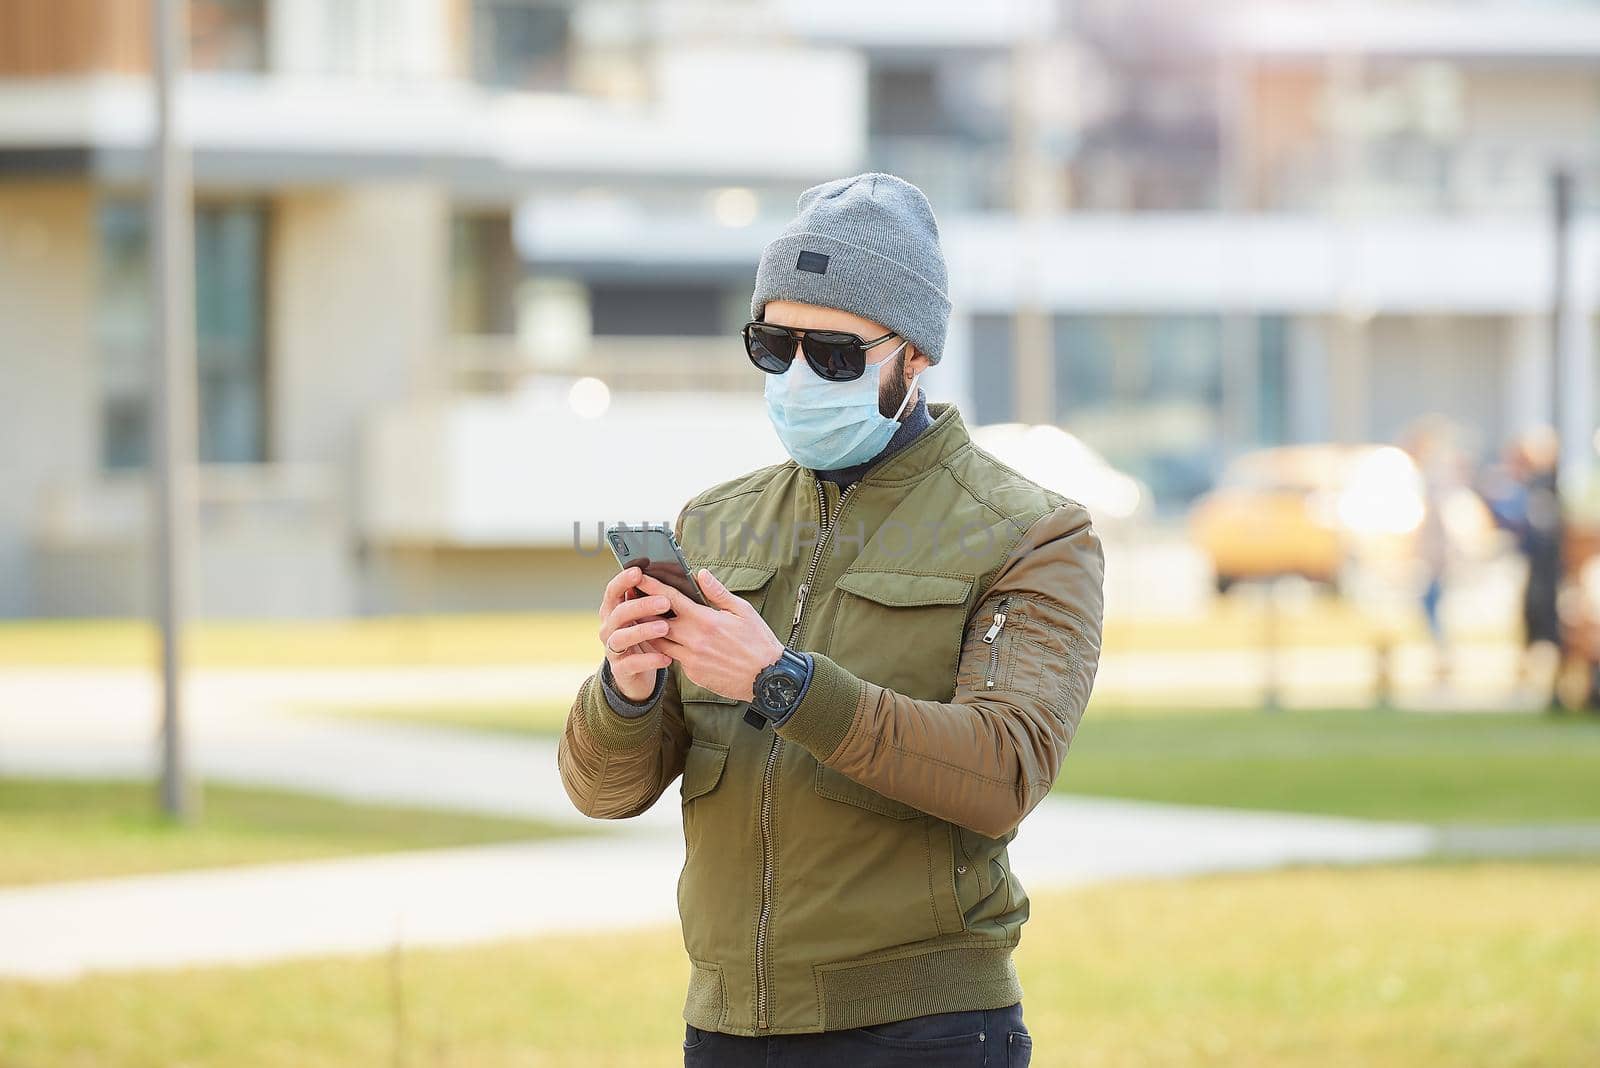 A man in a medical face mask to avoid the spread coronavirus holding his smartphone in the cozy street. A guy wears a gray cap, sunglasses, and a face mask against COVID 19.